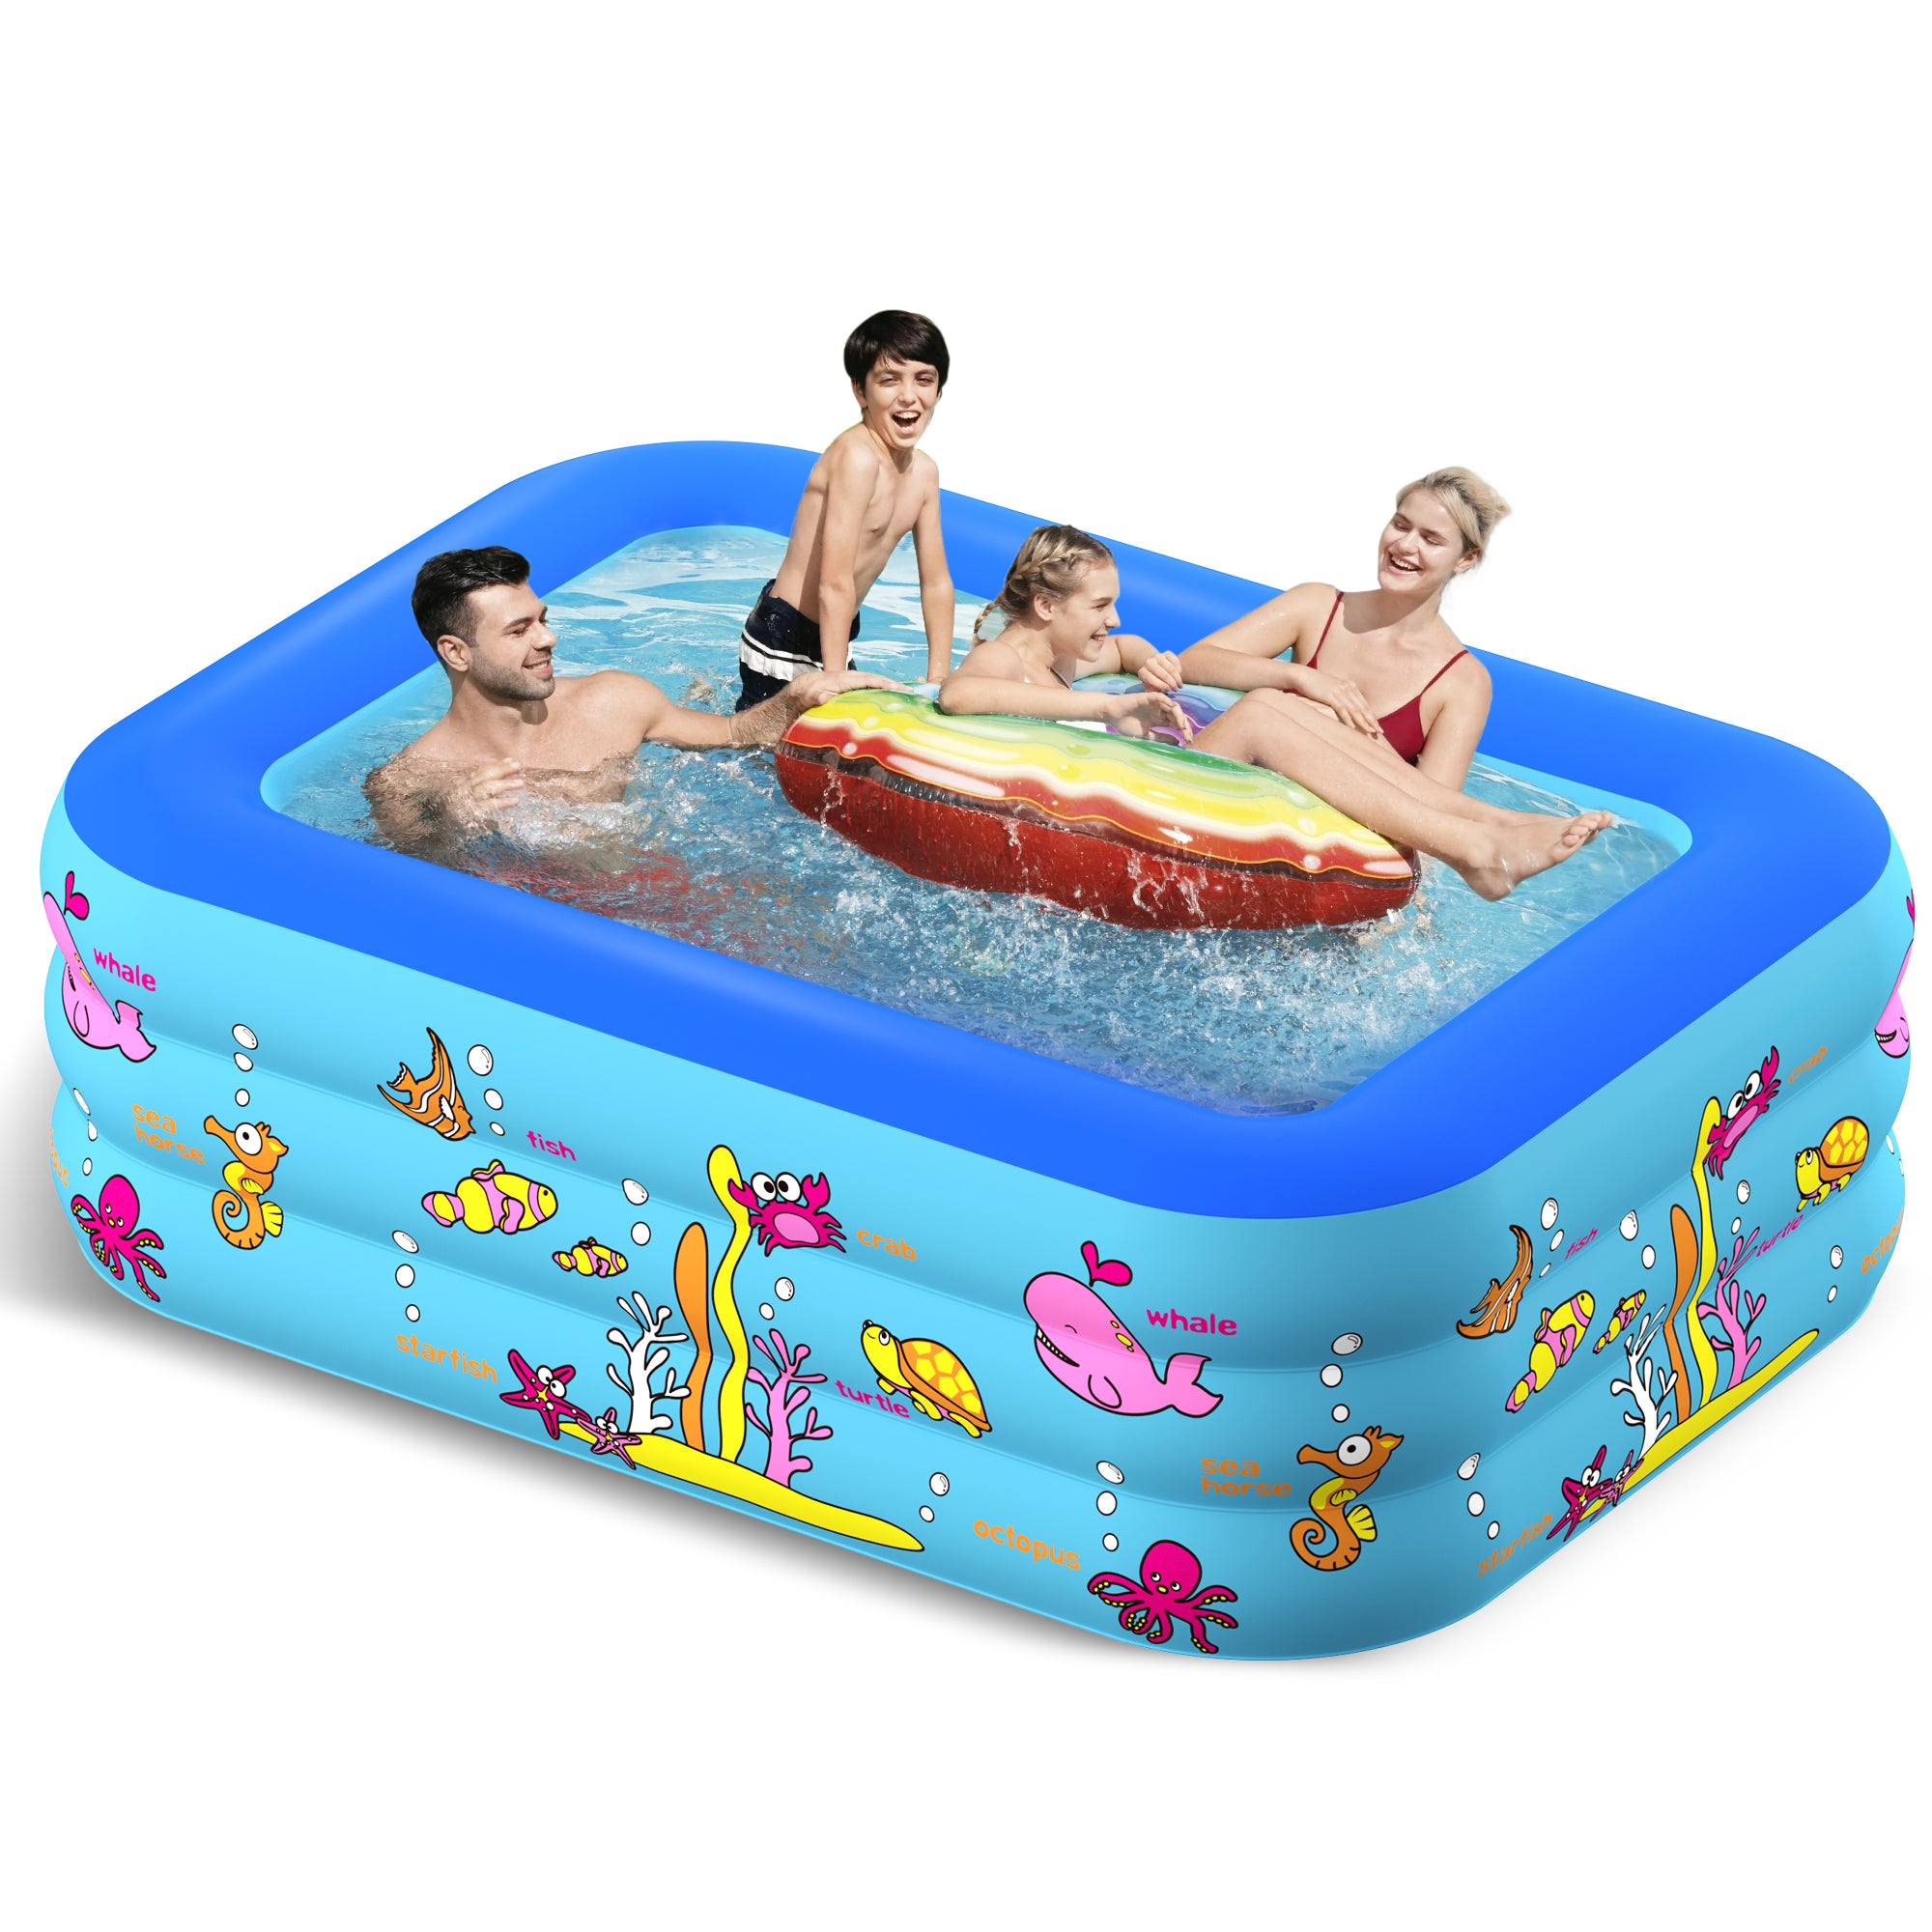 Inflatable Swimming Pool, 83" X 57" X 24" Full-Sized Unique 3-Tier Design Swimming Pool for Backyard, Outdoor, Garden, Summer Water Party